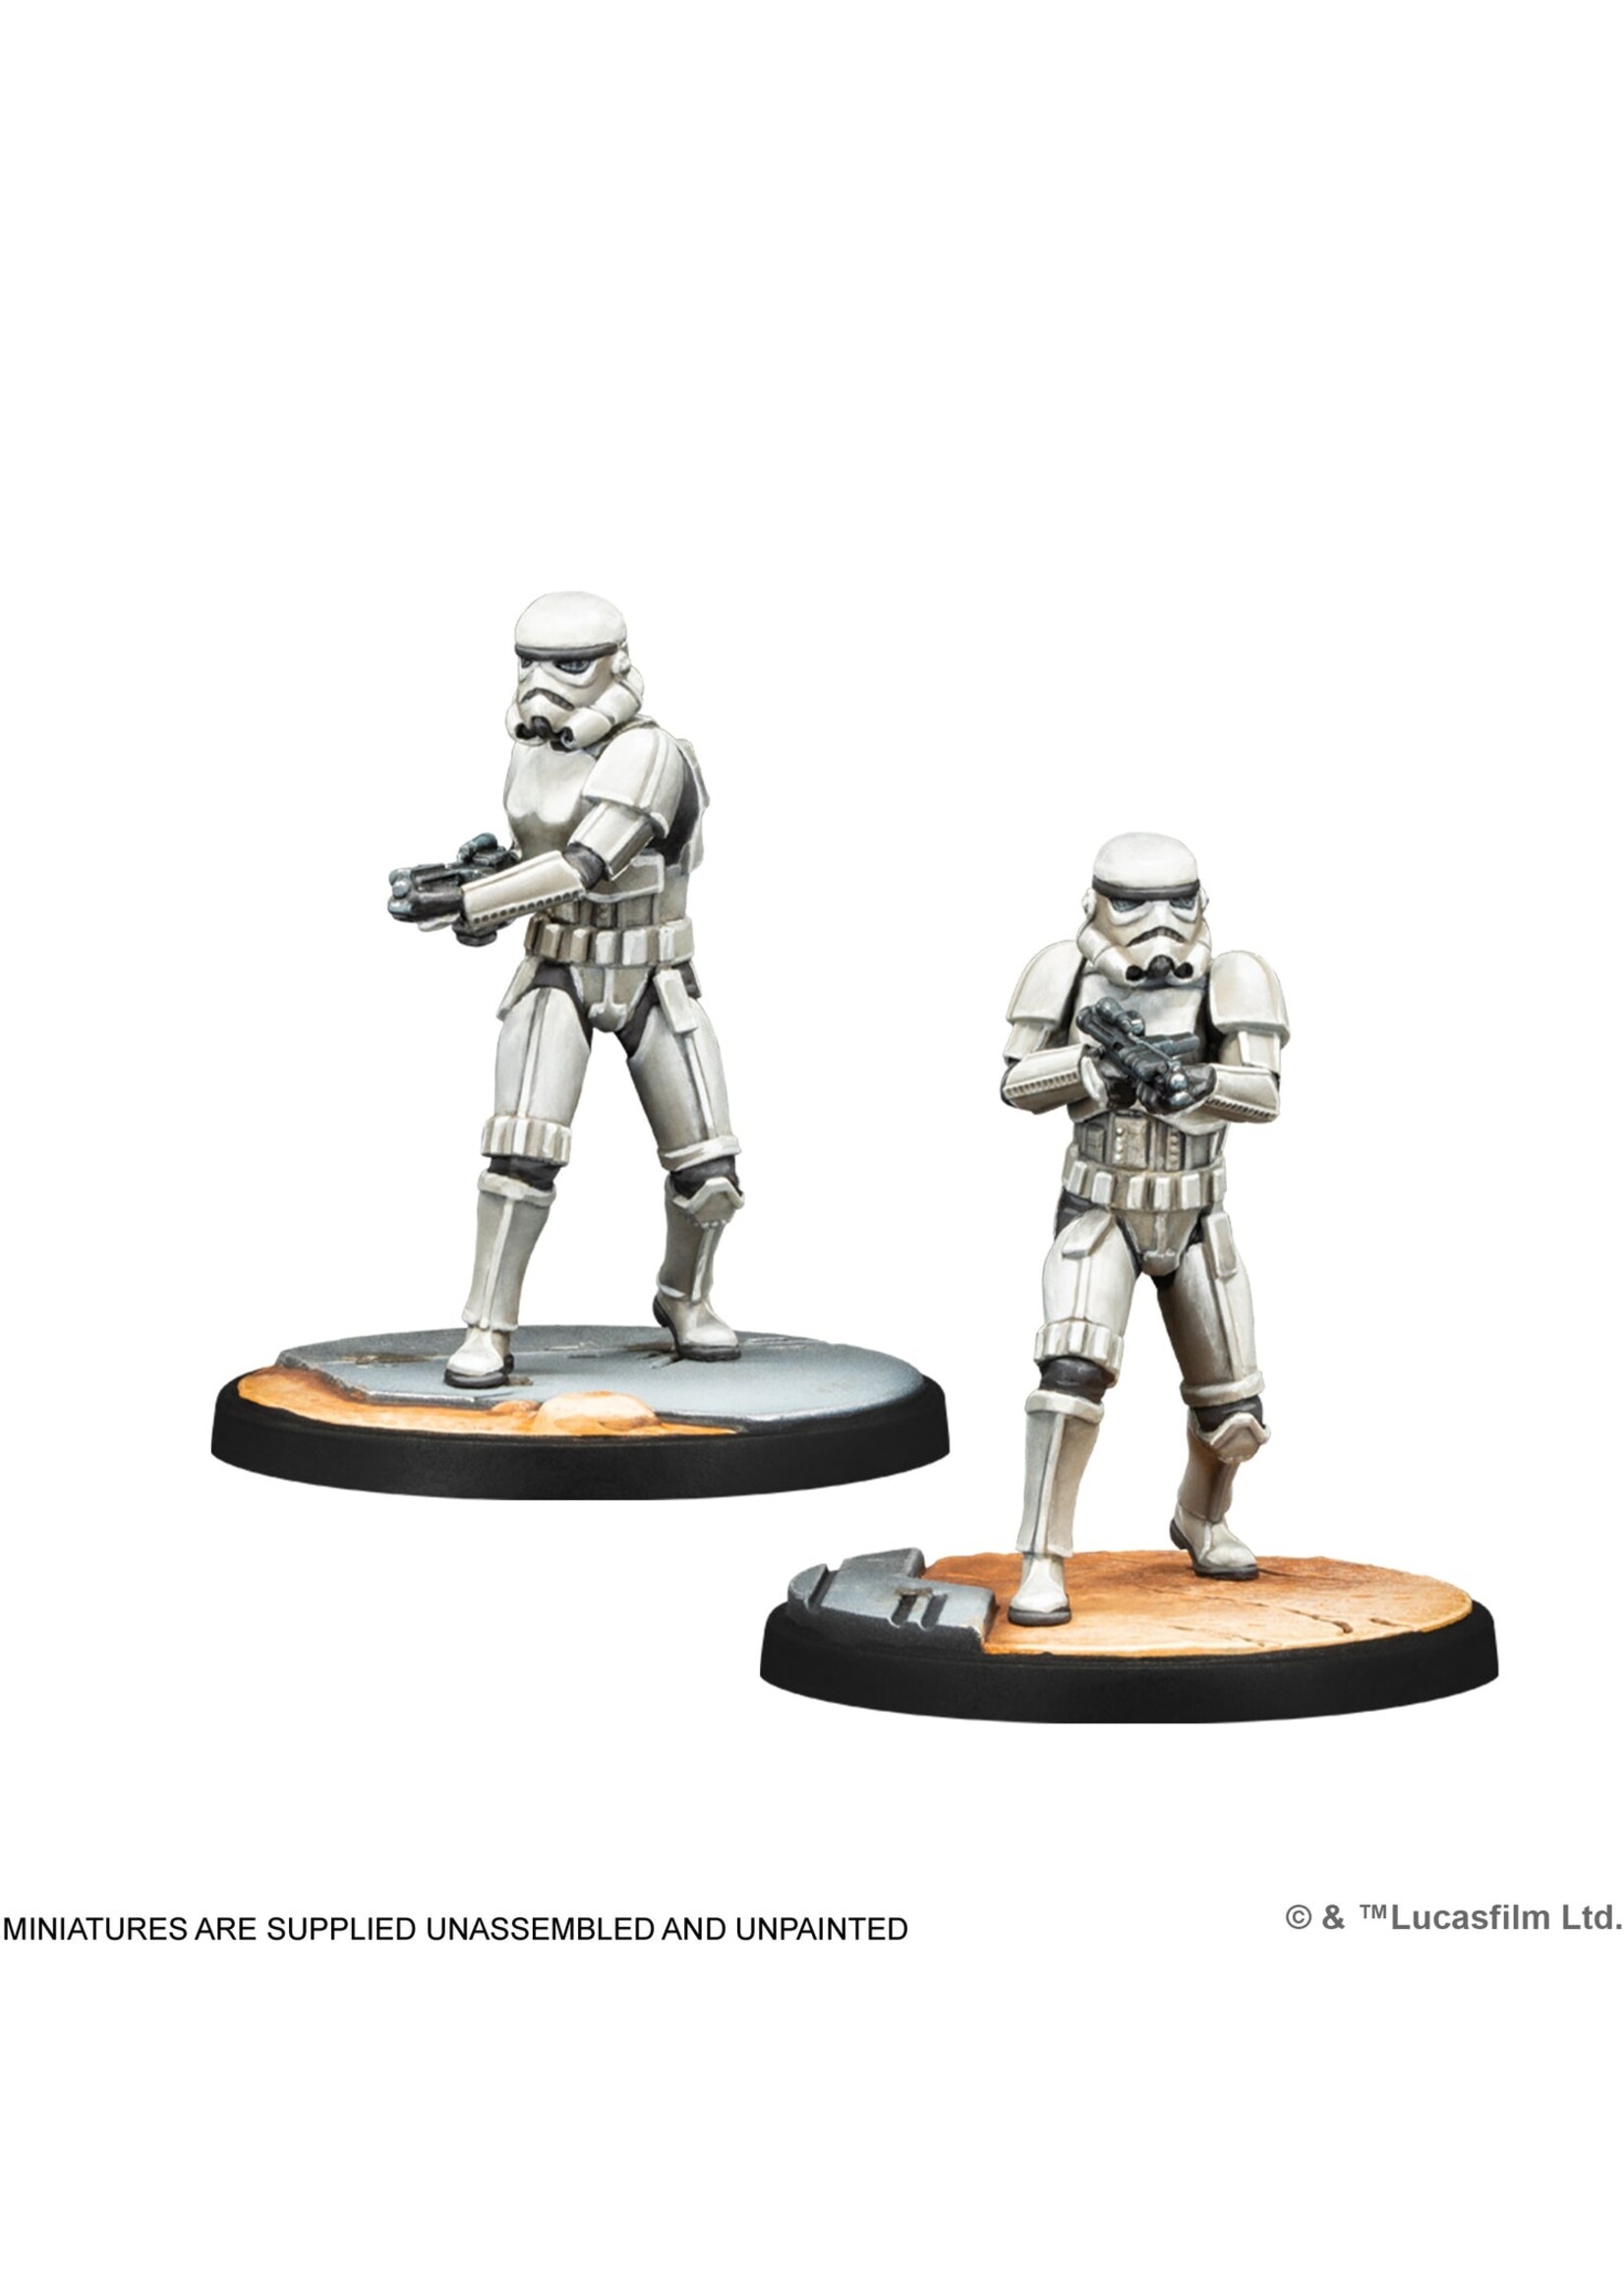 Atomic Mass Games Star Wars: Shatterpoint -  Fear and Dead Men Squad Pack